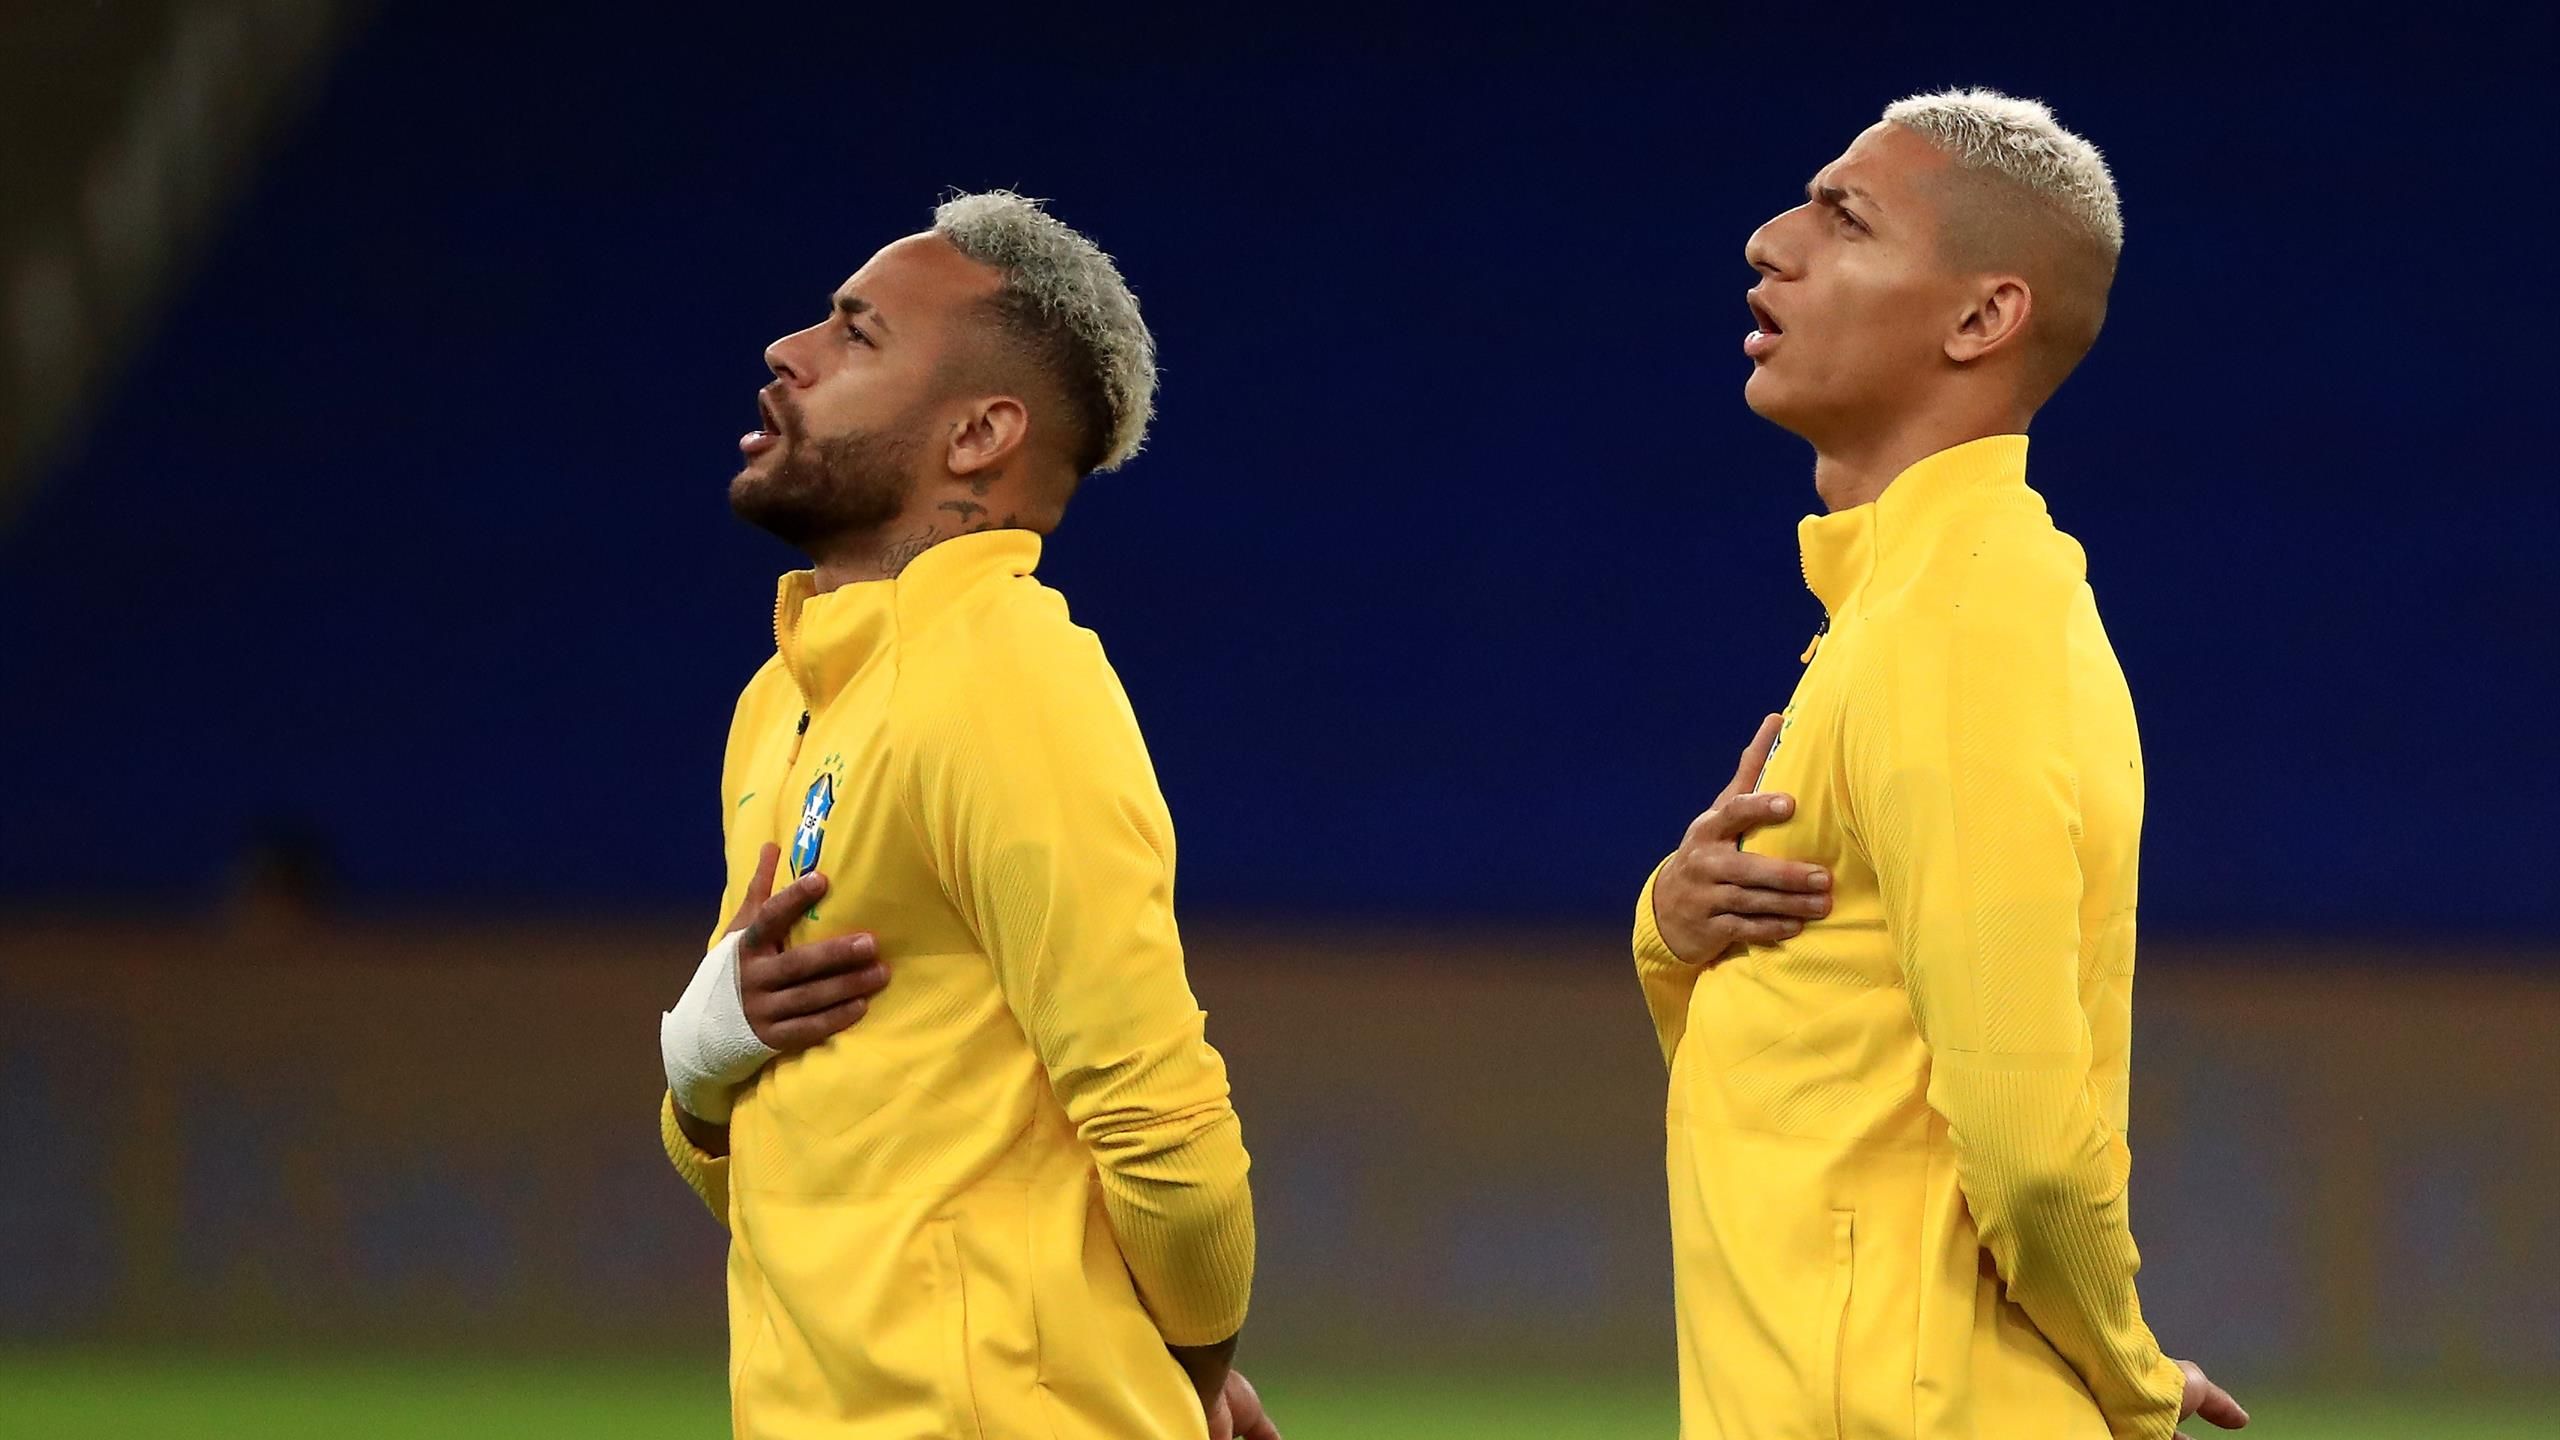 Exclusive defends his 'idol' Neymar ahead of 2022 World Cup - 'Like it or not, he is a standout player'